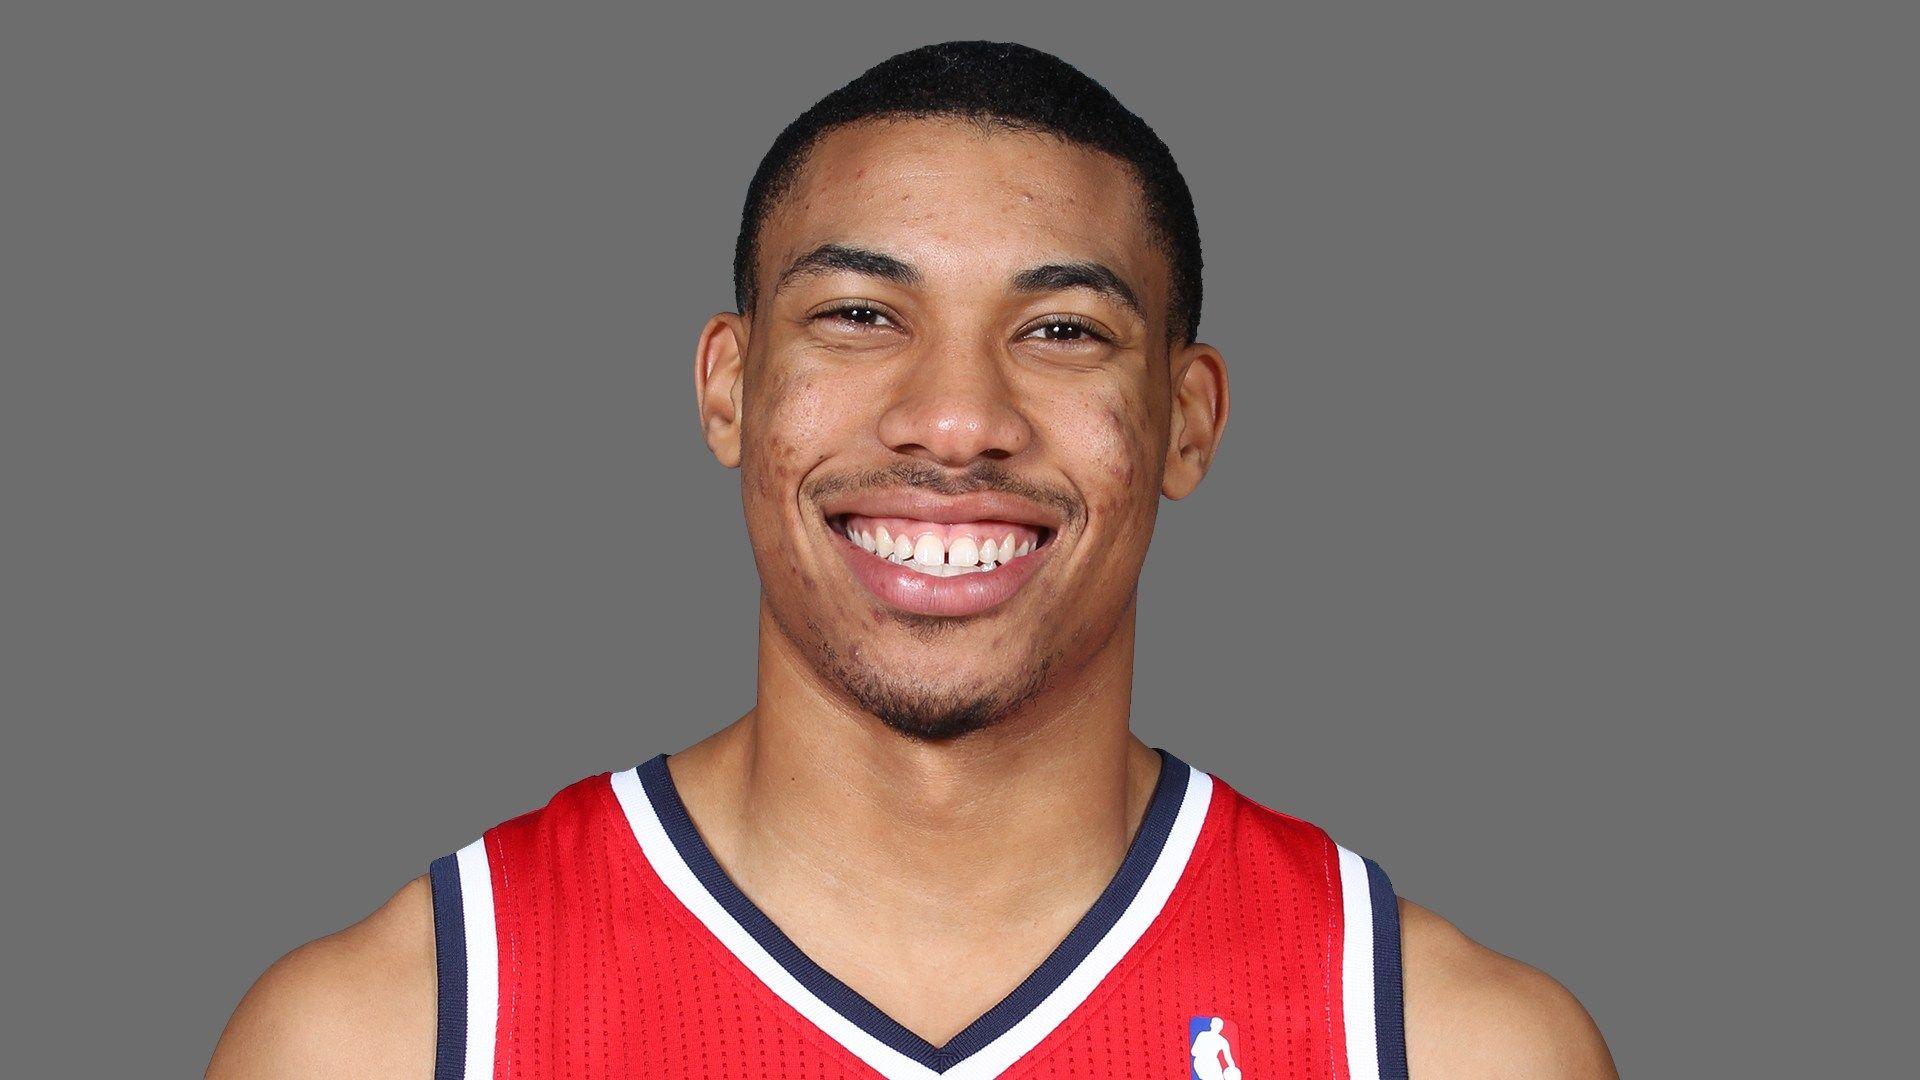 Everyone keeps saying that otto porter looks so much like wilt chamberlain ...